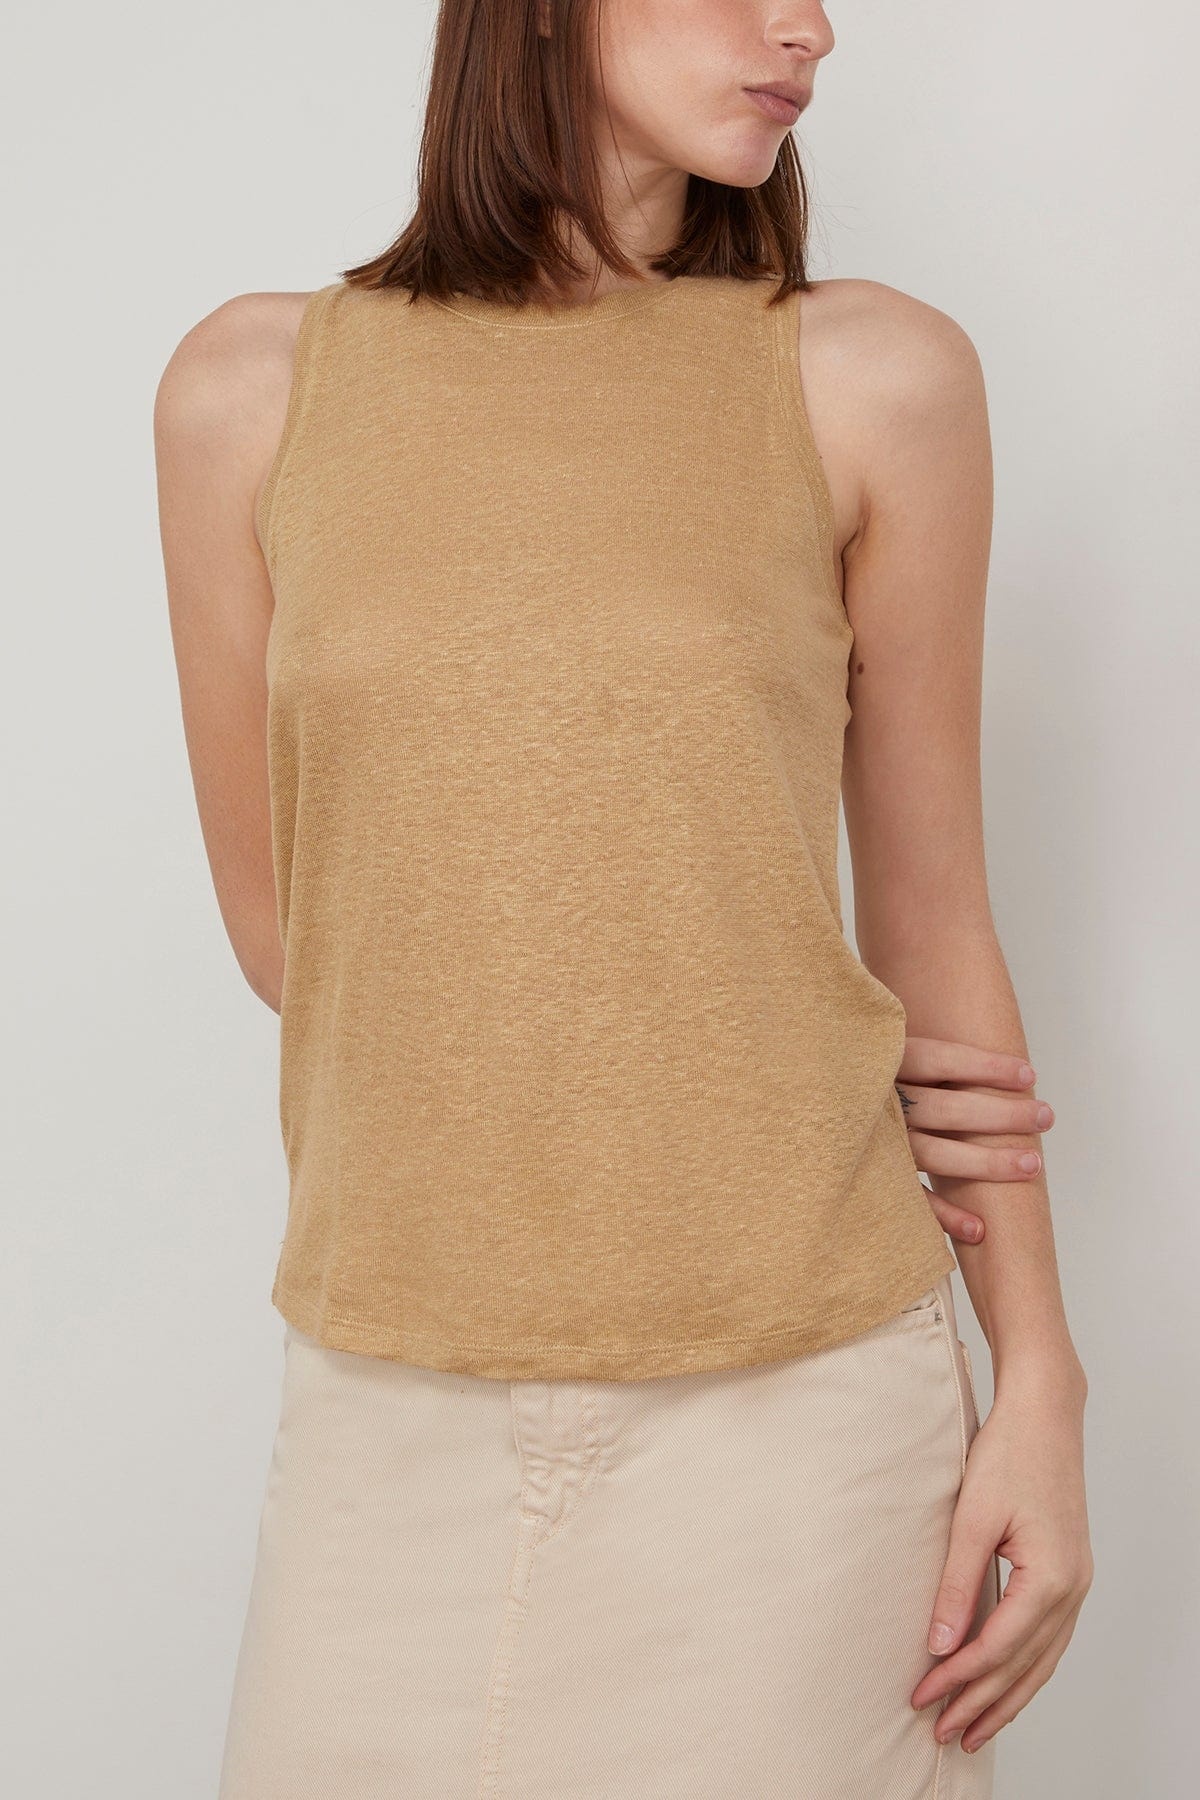 Natural Ease Sleeveless Top in Shimmering Gold - 3